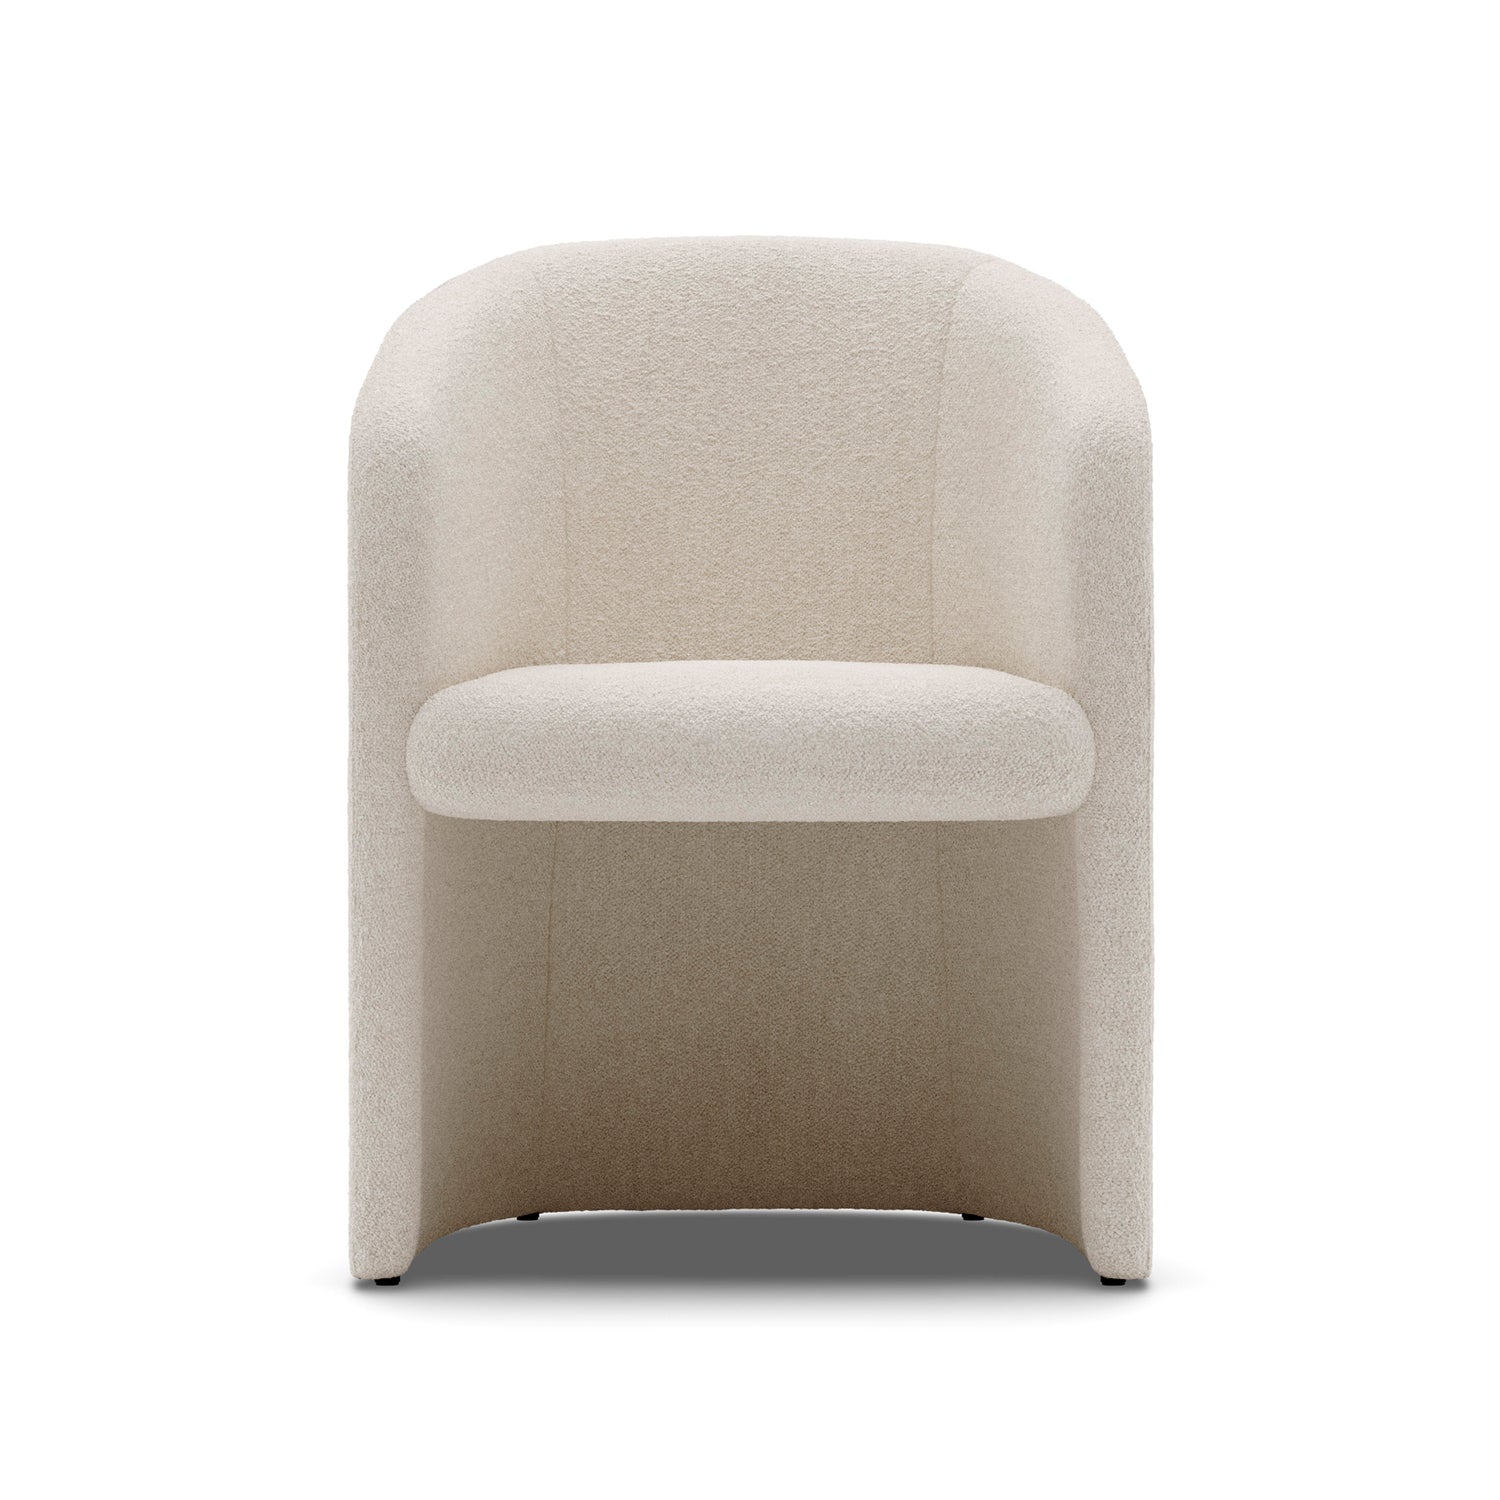 New Works Covent Club Chair in lana beige